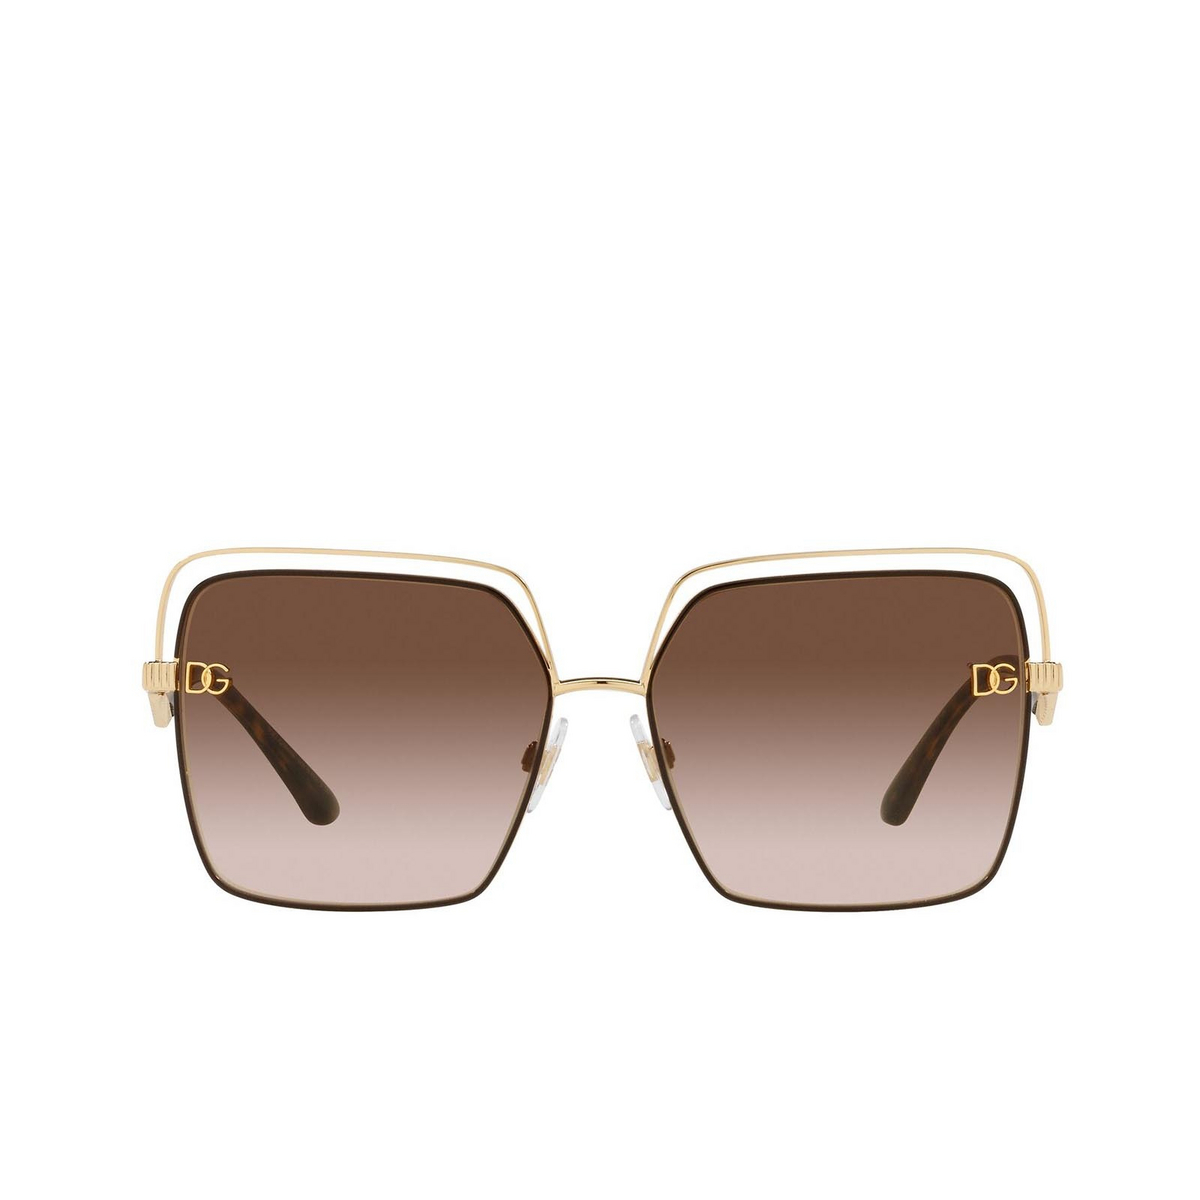 Dolce & Gabbana DG2268 Sunglasses 134413 Gold/Brown - front view